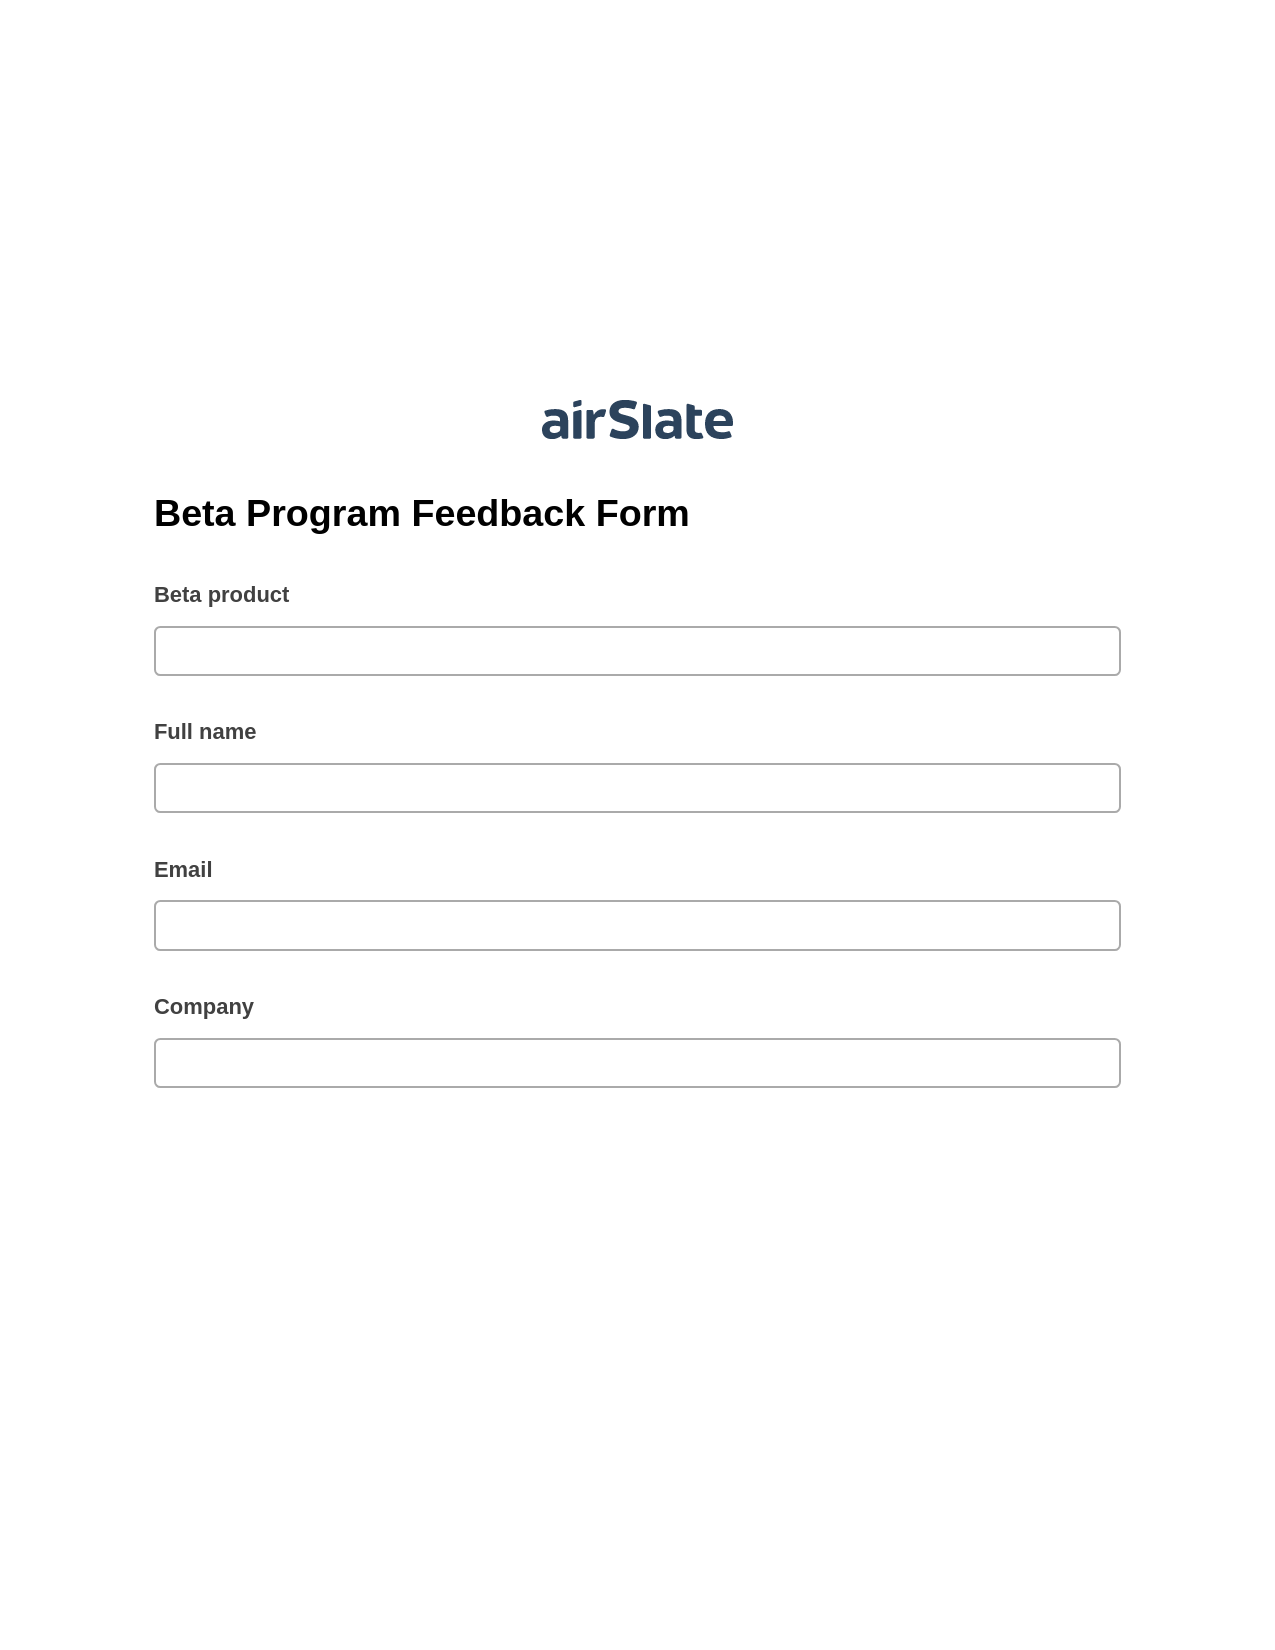 Beta Program Feedback Form Pre-fill from Excel Spreadsheet Bot, SendGrid send Campaign bot, Export to NetSuite Record Bot